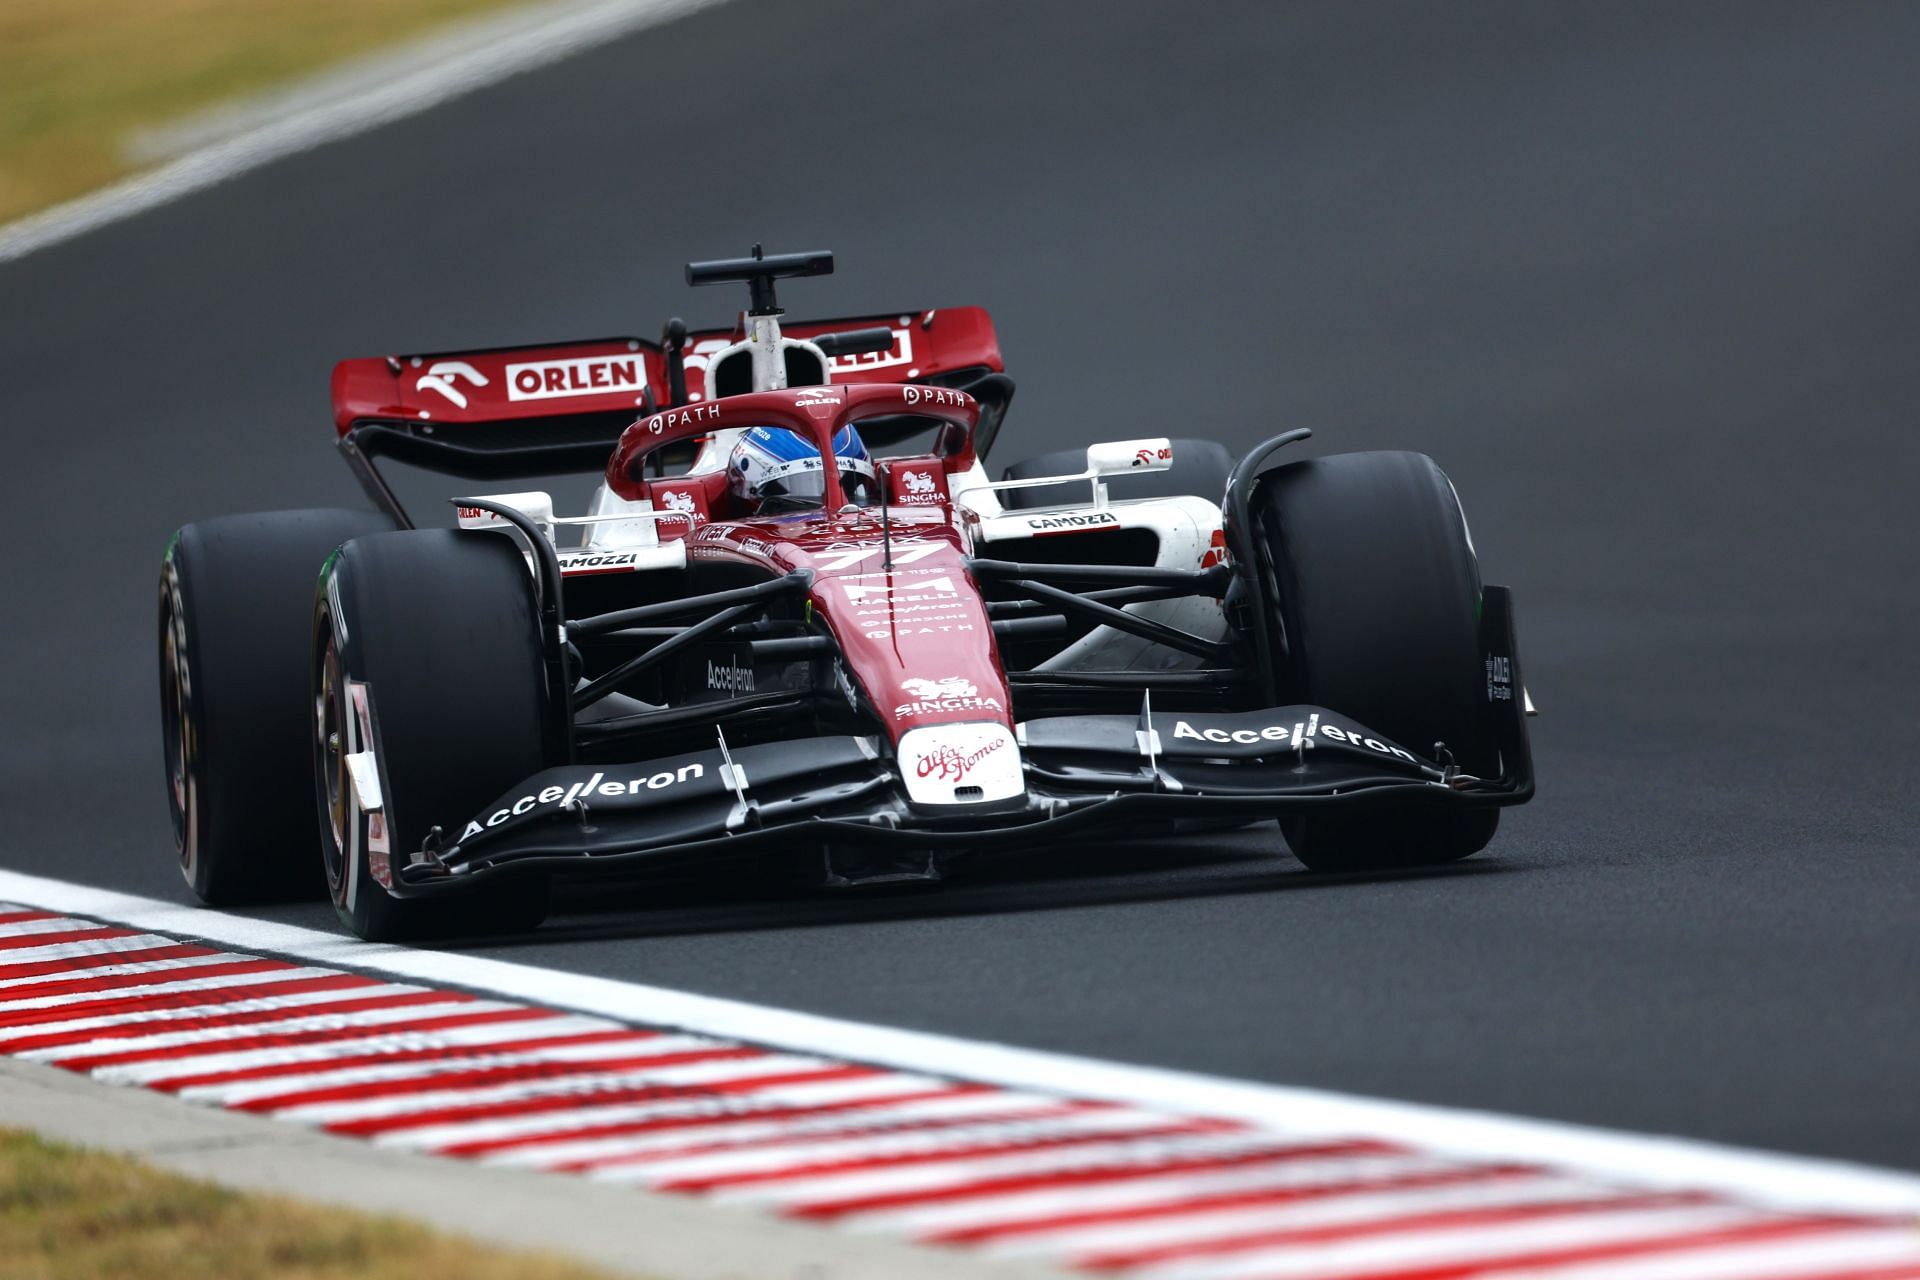 Audi are reportedly close to buying a 75% stake in Sauber.